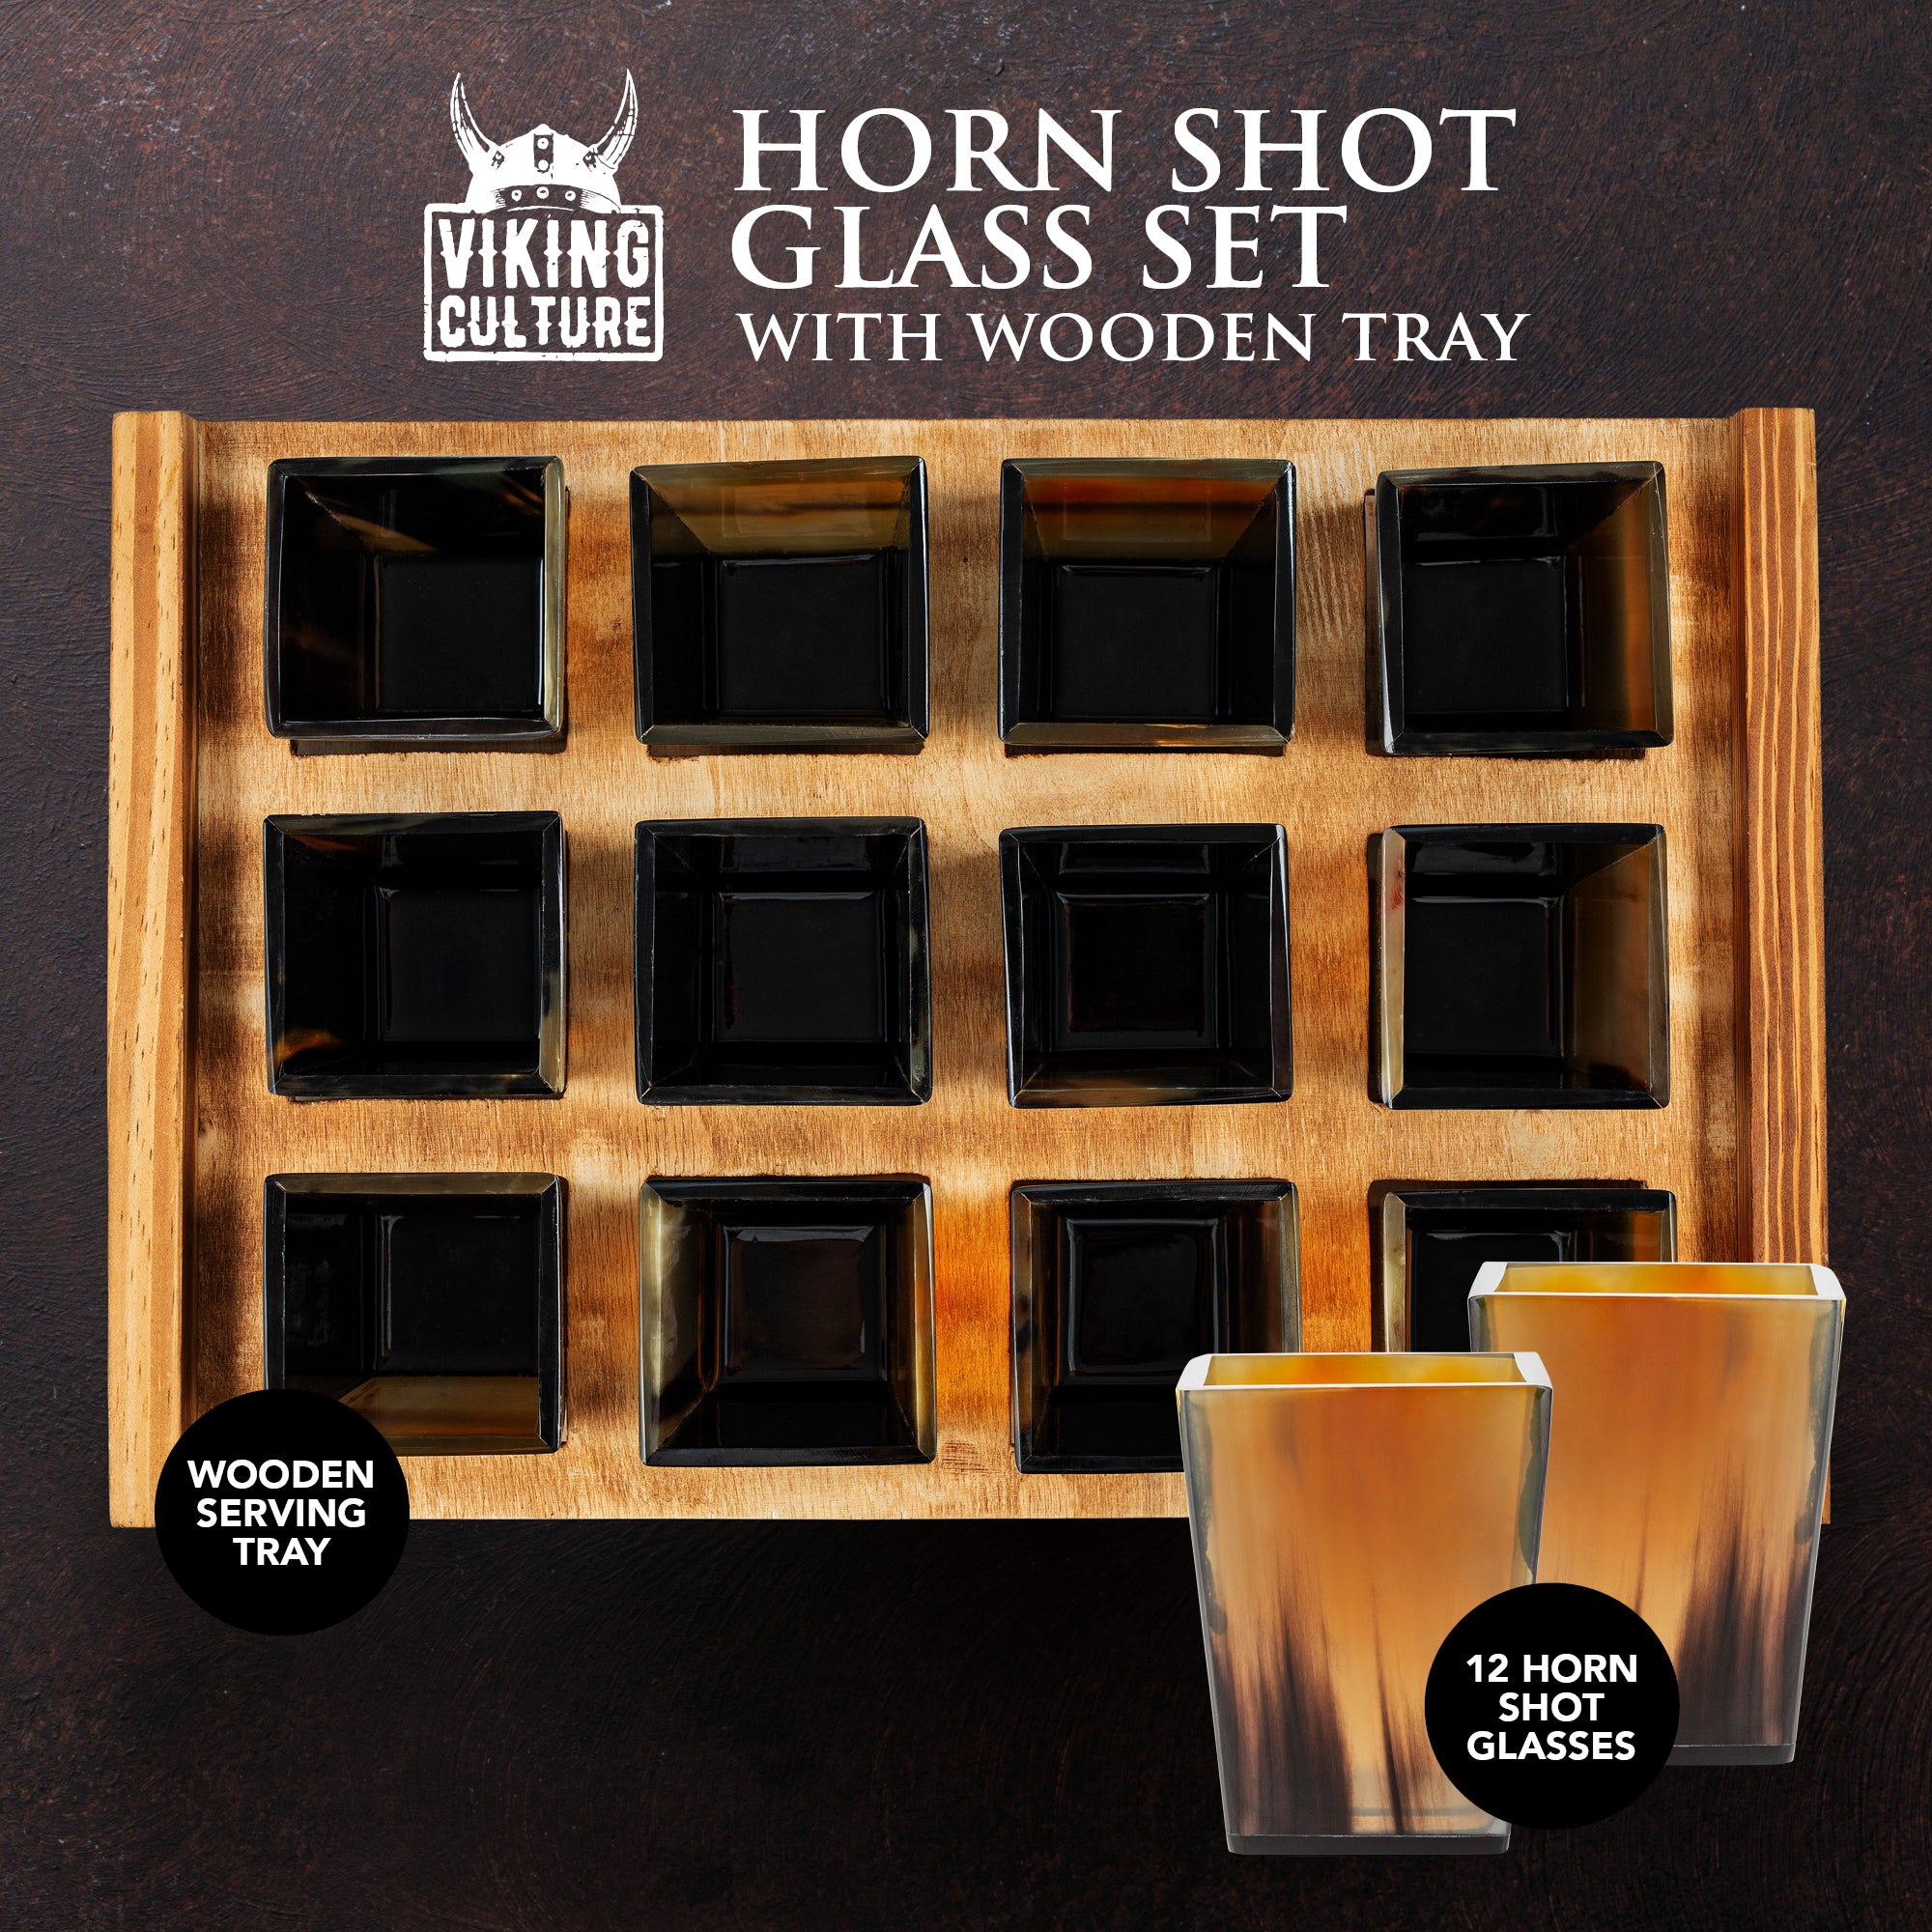 Viking Culture Horn Shot Glasses - Authentic Medieval and Nordic-Inspired Drinkware with Wooden Serving and Storage Tray - Handmade Drinking Set - Perfect for Parties, Collection and Gift - 12-Pack